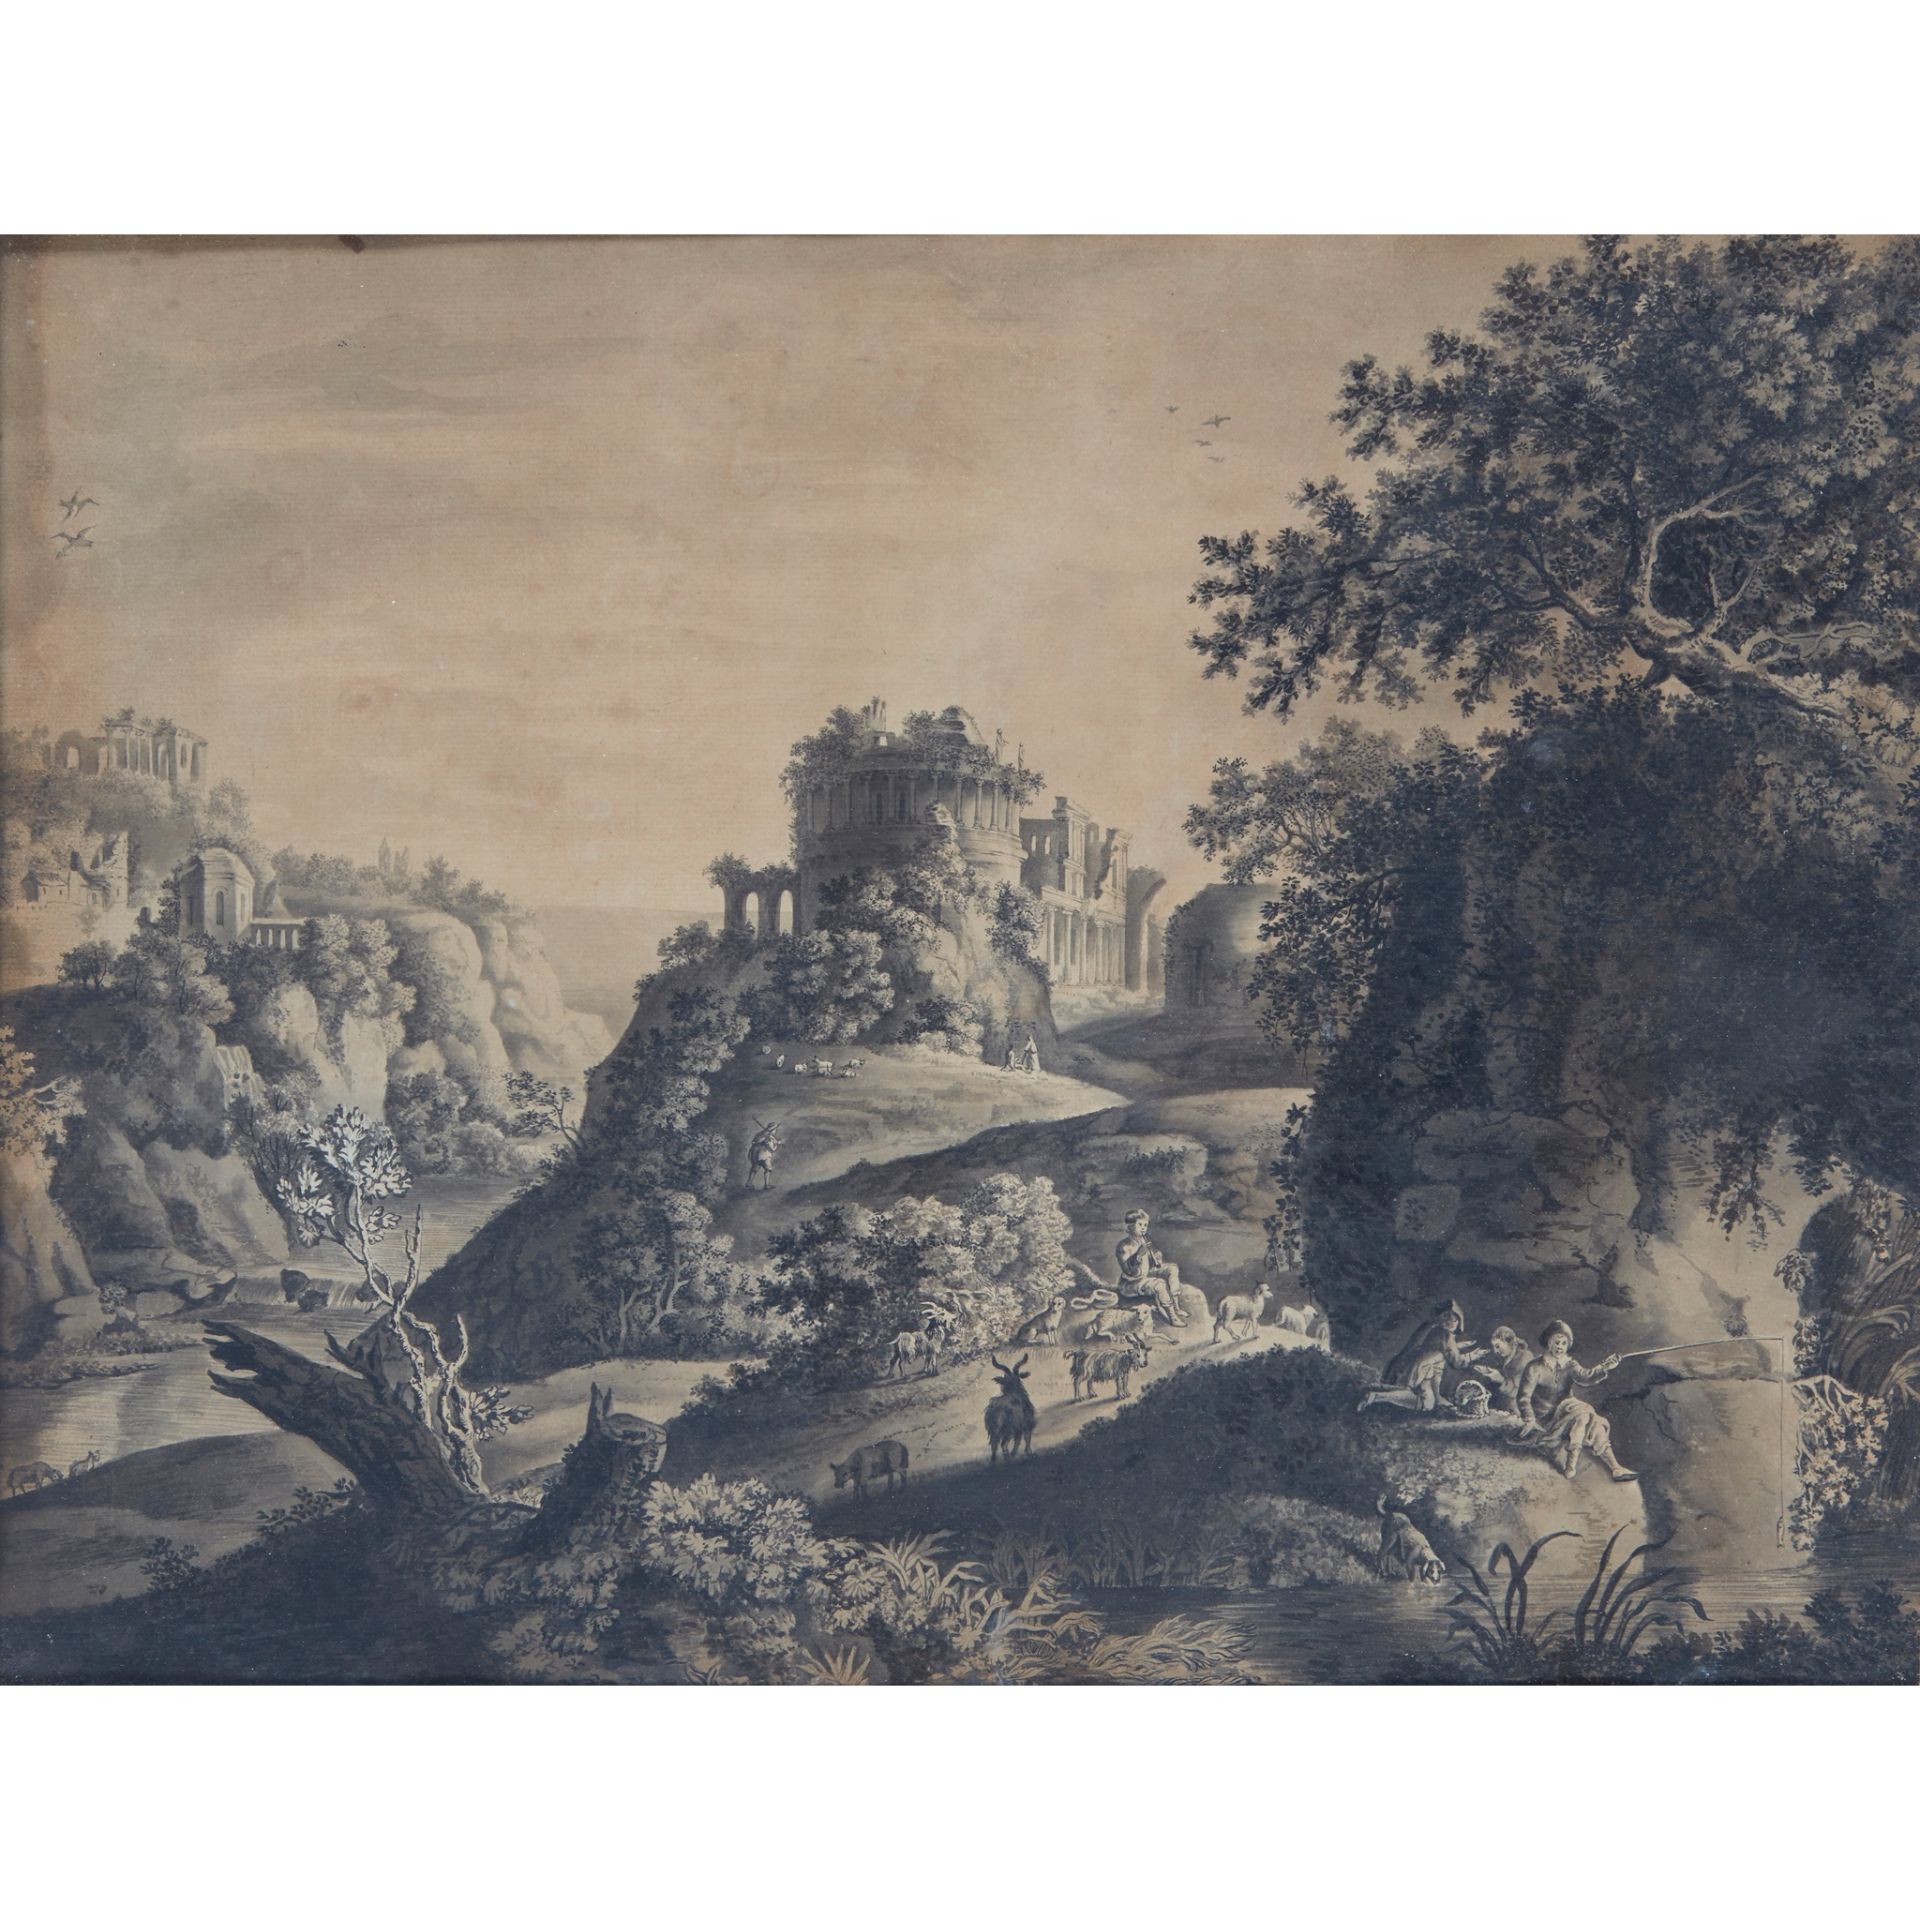 MANNER OF JACOB PHILIPP HACKERT AN ITALIANATE LANDSCAPE WITH FISHERMAN